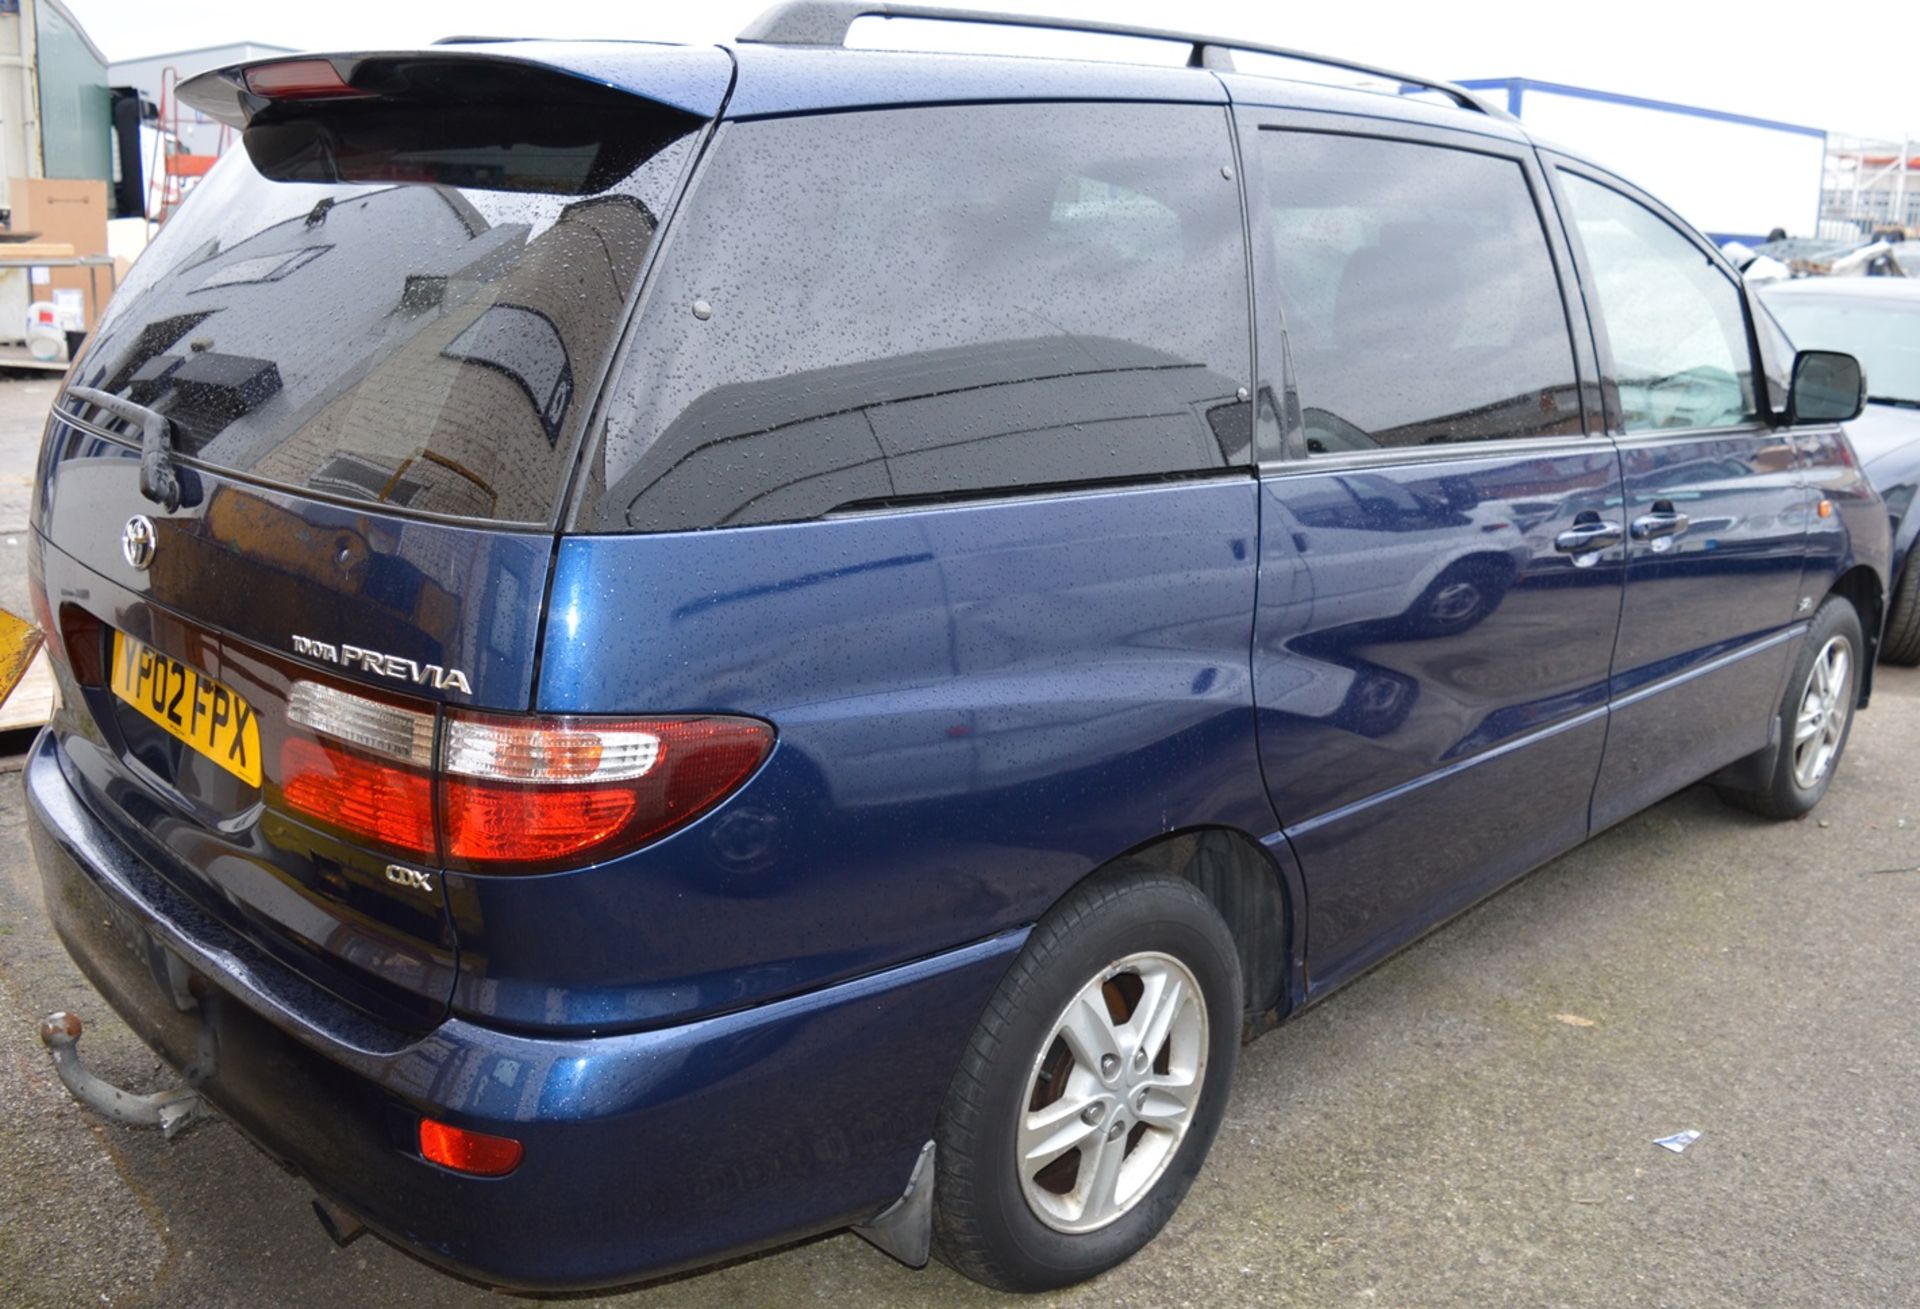 1 x Toyota Privia DX D4 Deisel MPV 7 Seater - 2002 - Panorama Roof - Alloys - Approx 130,000 Miles - Image 4 of 6